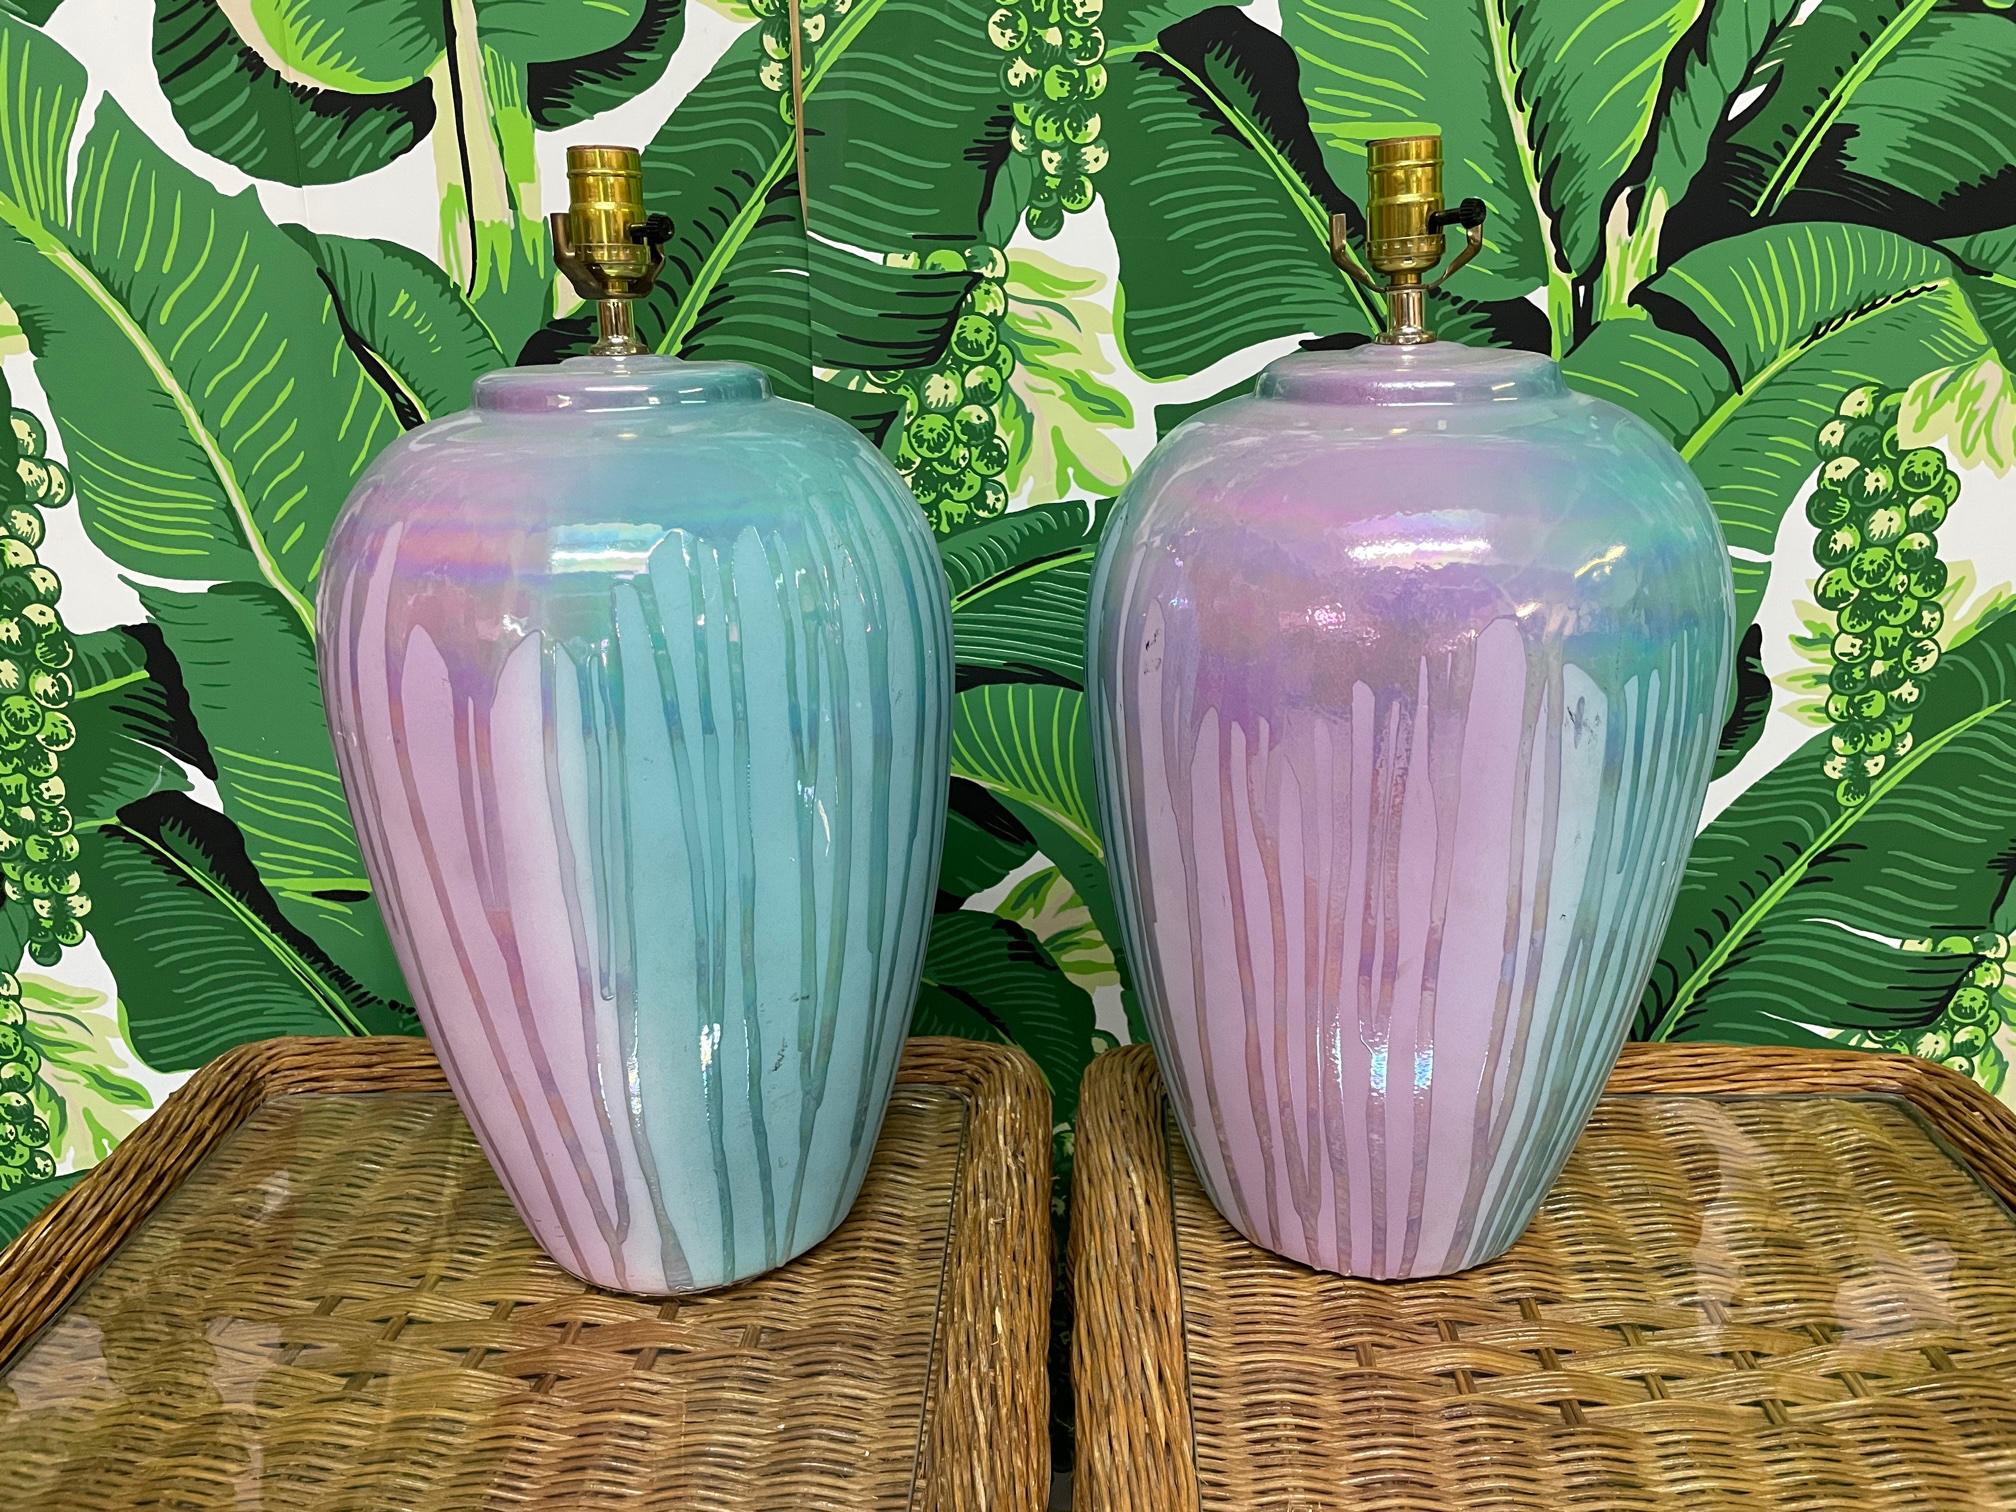 Pair of ceramic table lamps feature a drip glaze finish in teal and purple. Good condition with minor imperfections consistent with age, see photos for condition details. 
For a shipping quote to your exact zip code, please message us.
